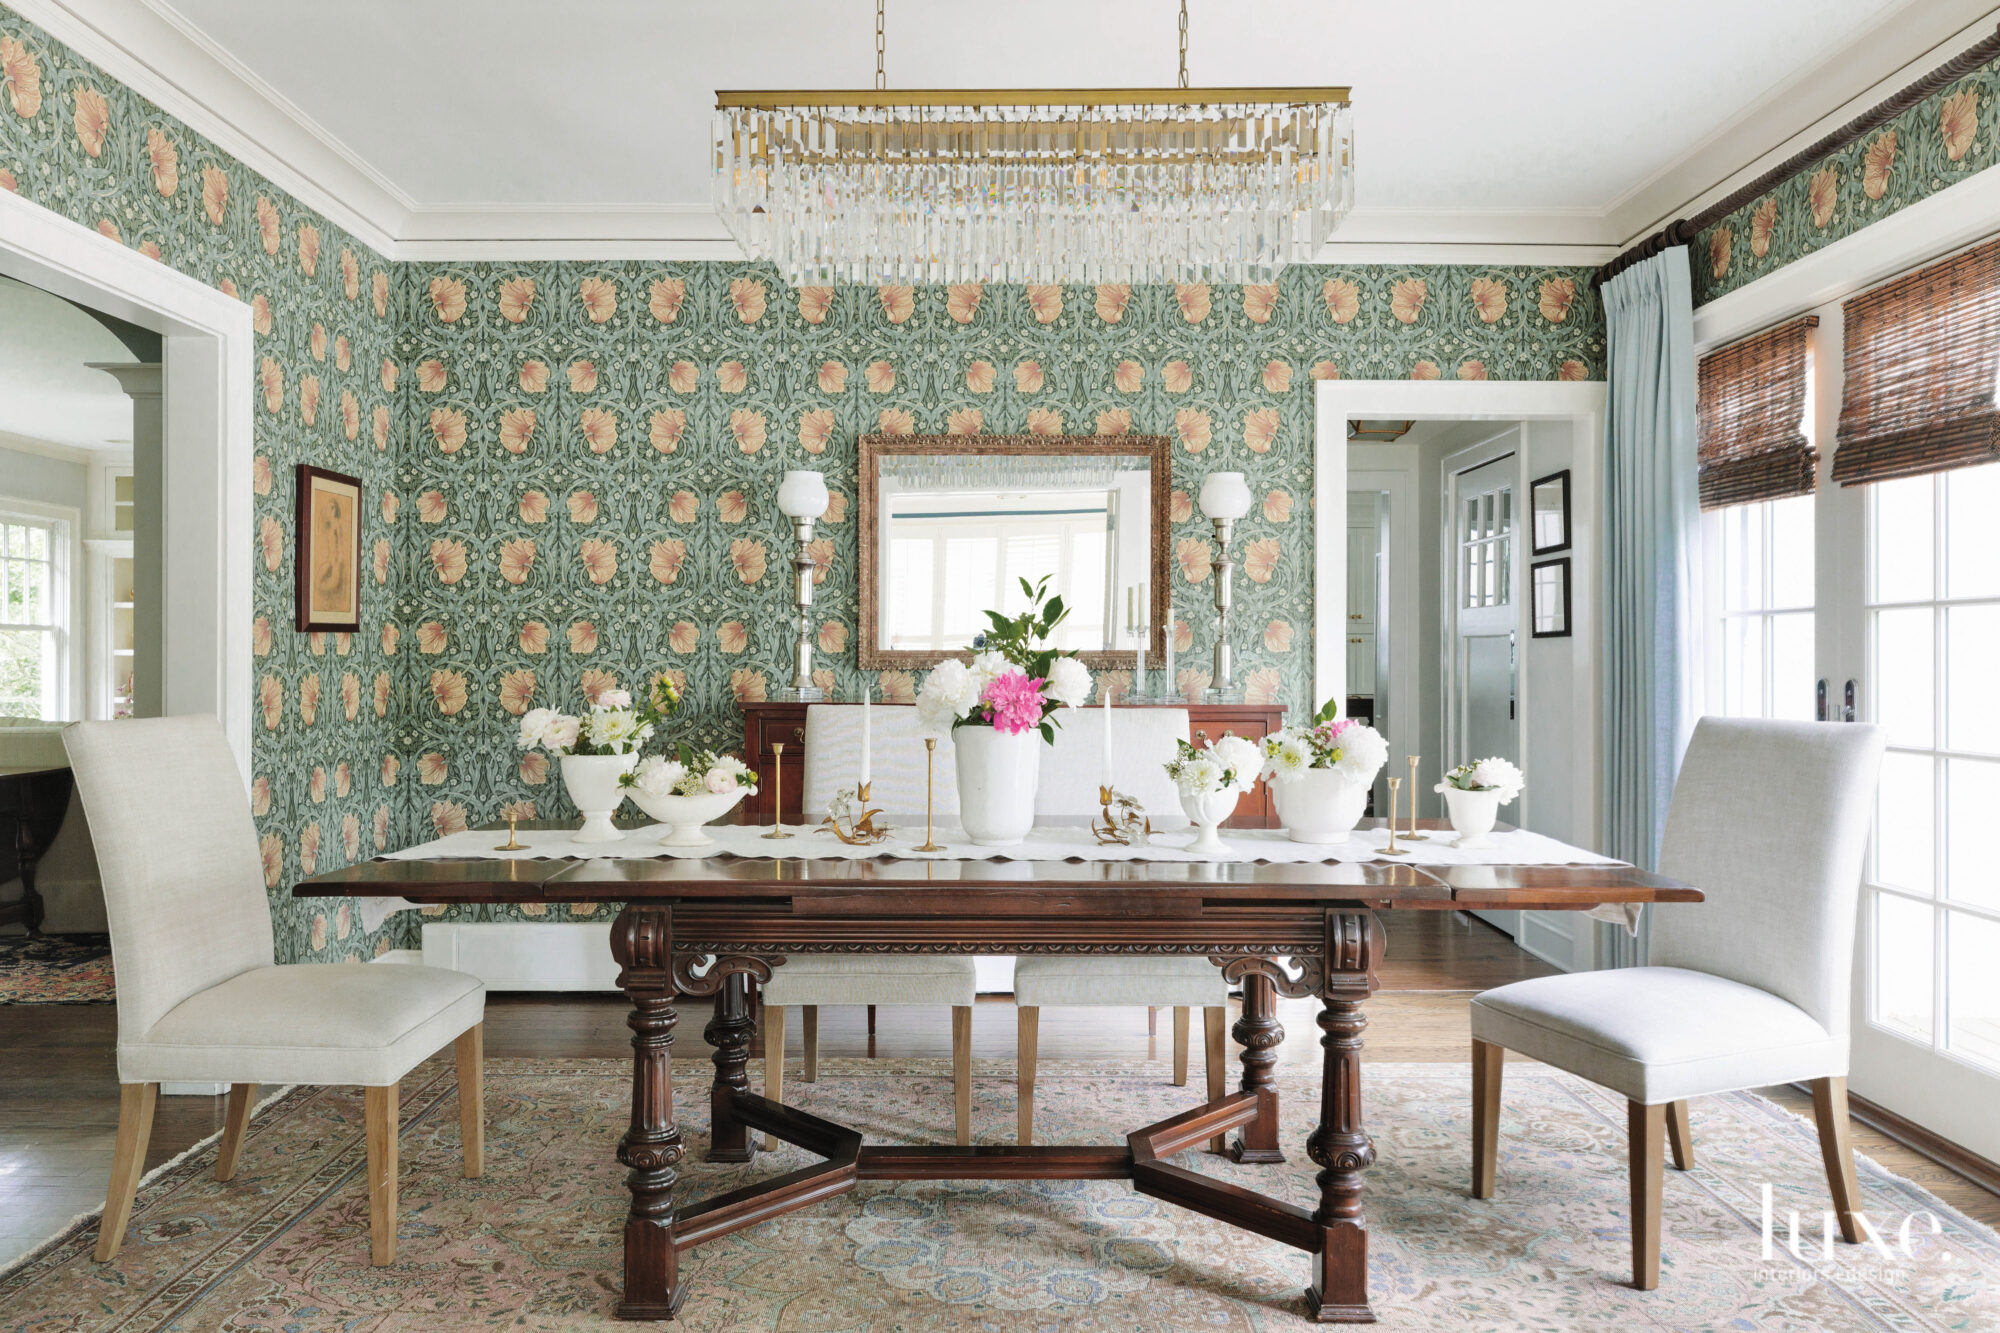 A grand wooden table topped with white flowers is centered in the dining room, surrounded by an eclectic, moss green wallpaper